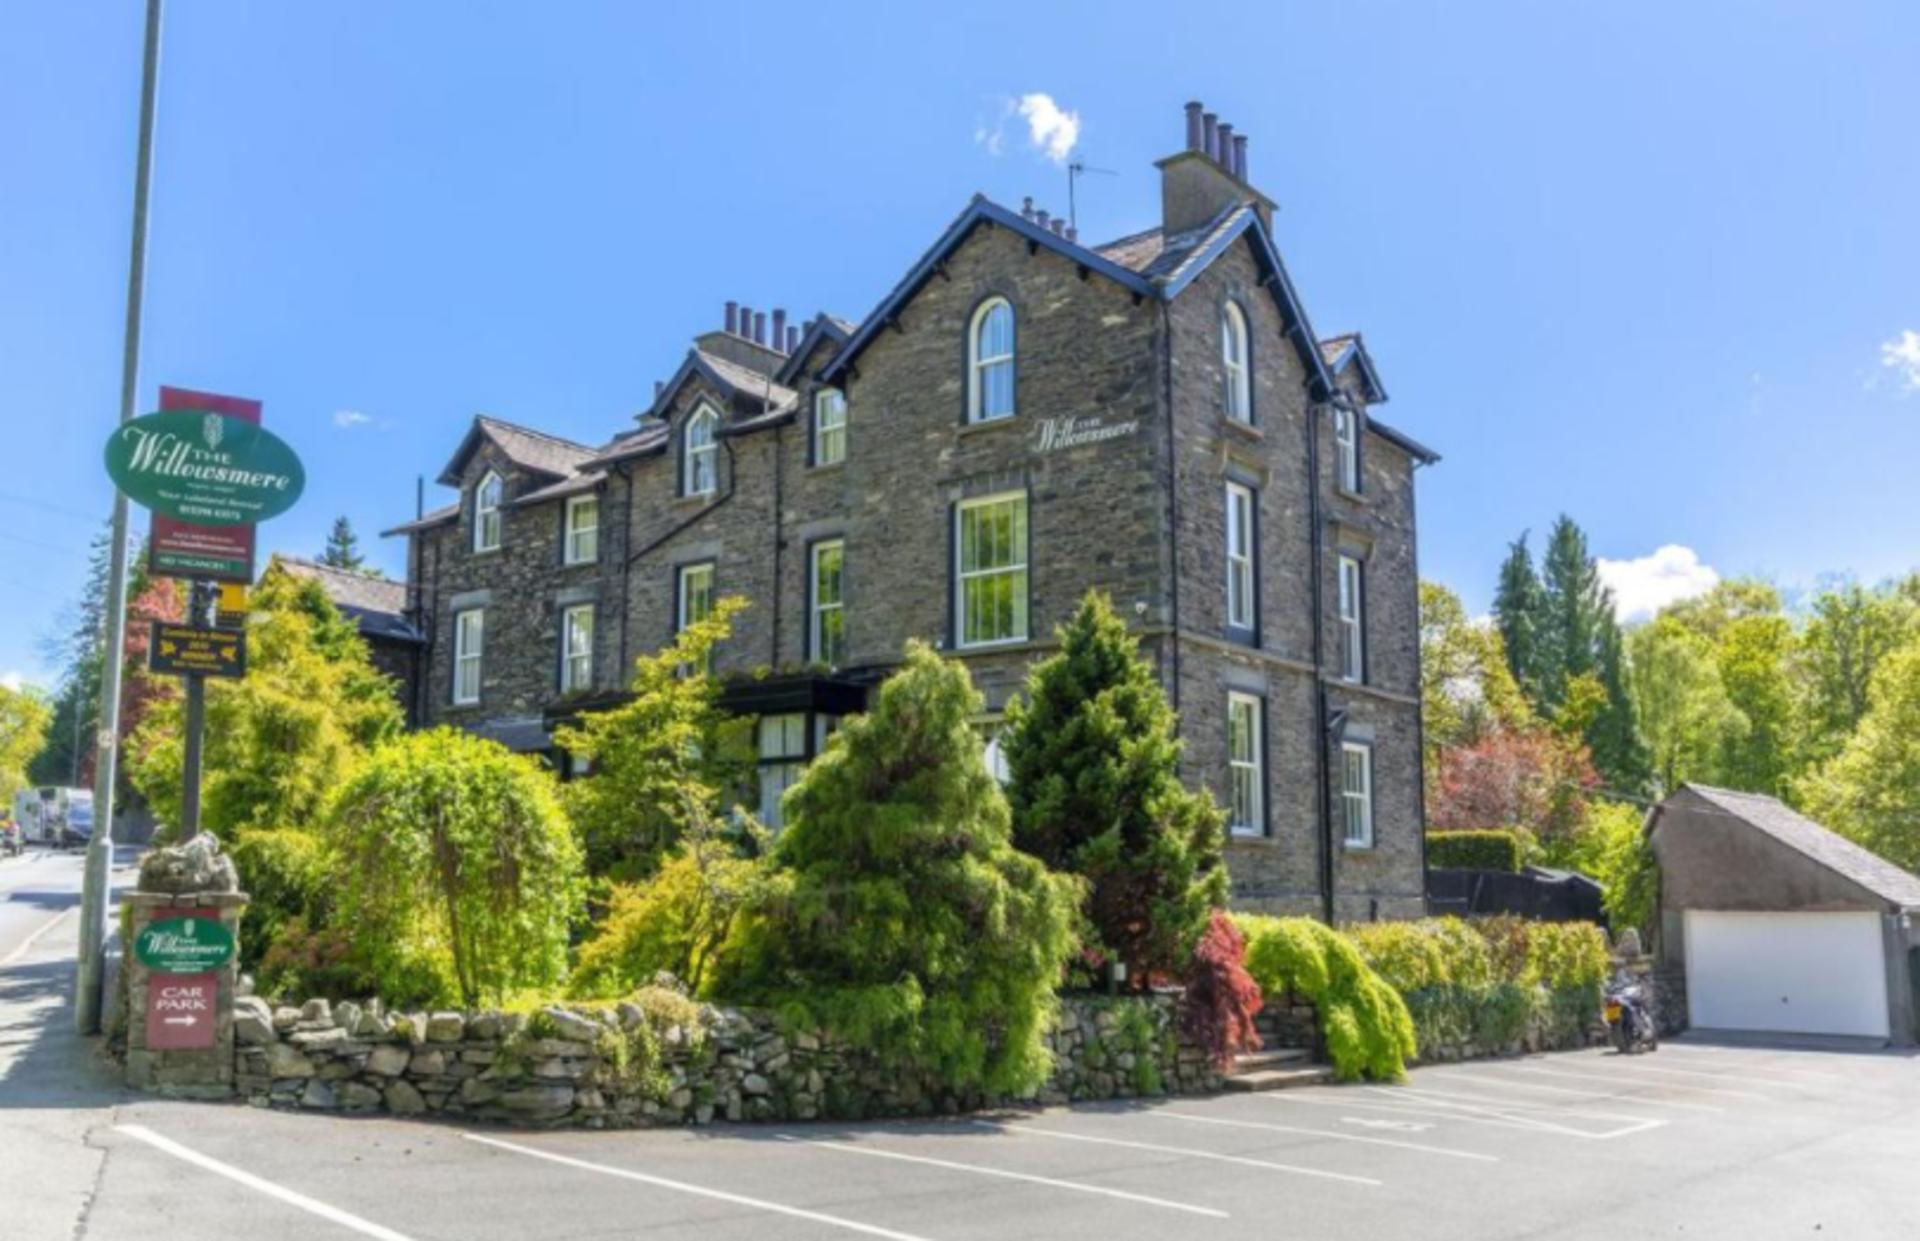 Lake District B&B up for sale for £1.5m